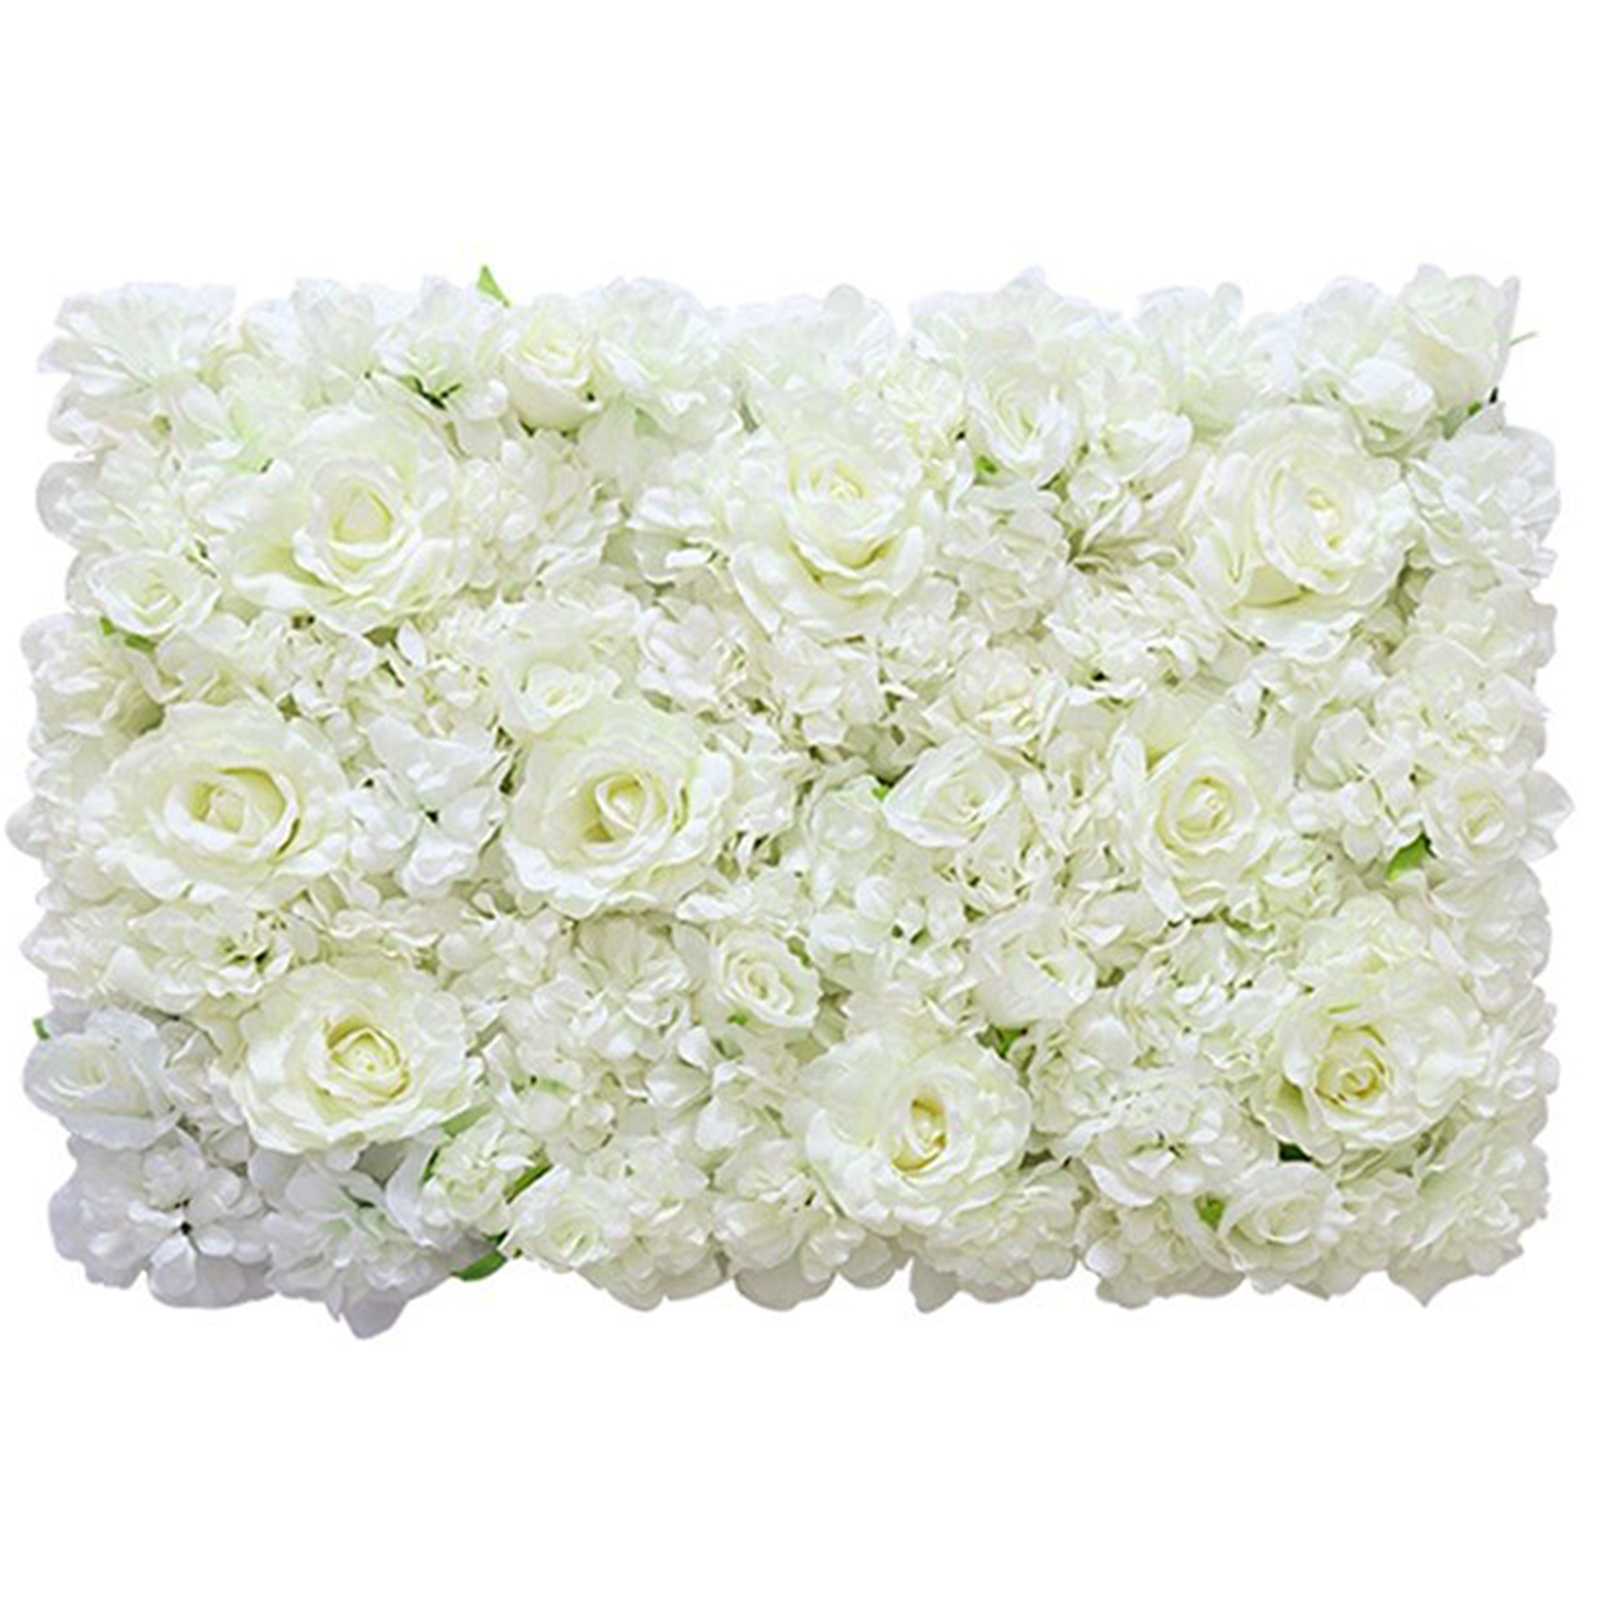 Details about   Artificial Flower Wall Panels Rose Hydrangea Background Decoration Wedding Party 